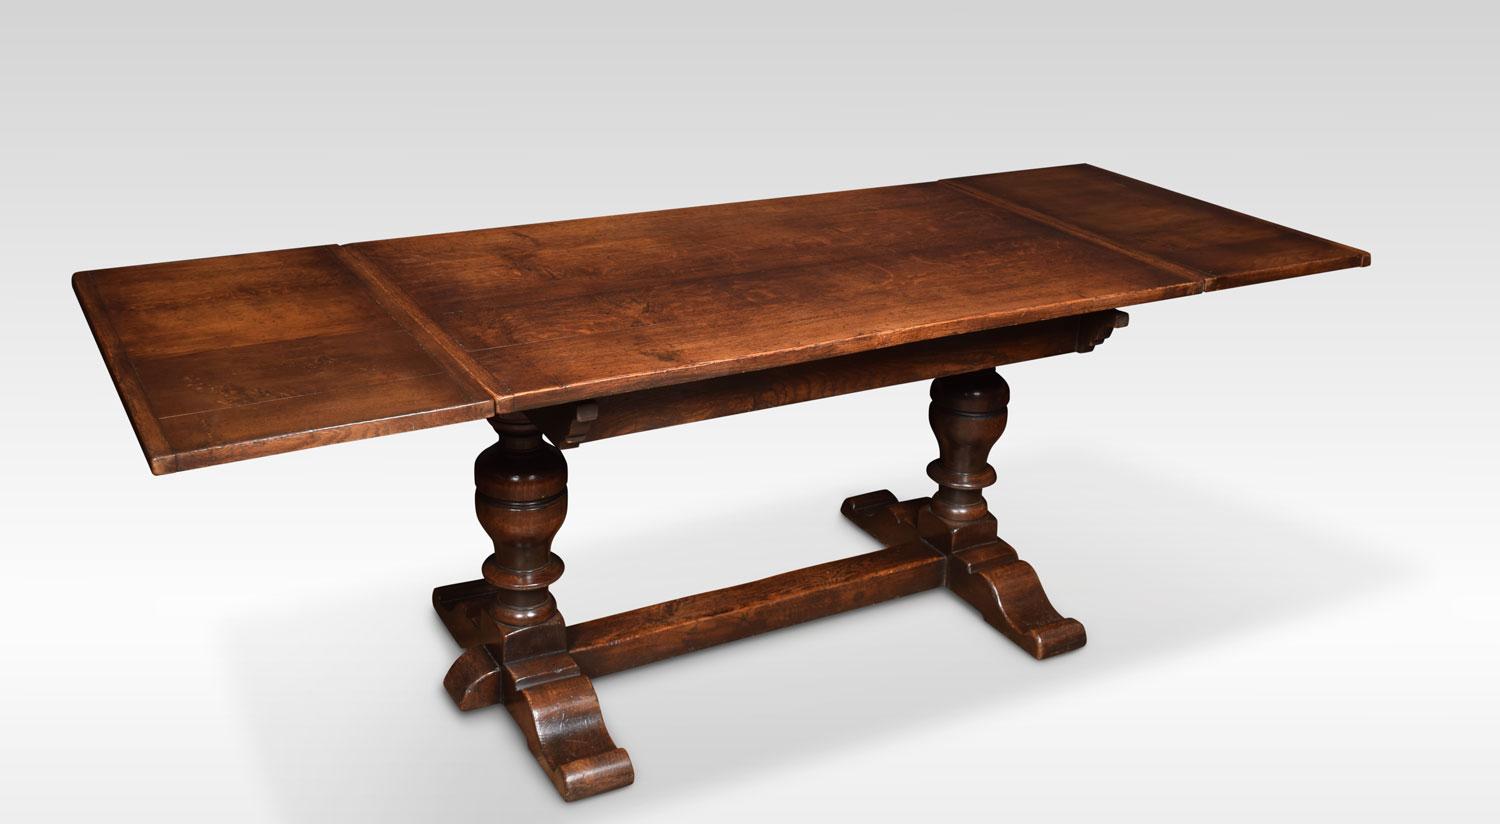 Oak draw leaf refectory table, the rectangular solid oak top having pull-out ends. Above lobed carved bulbous supports united by a stretcher.
Dimensions:
Height 31 inches
Width 54 inches opening to 90 inches
Depth 32.5 inches.